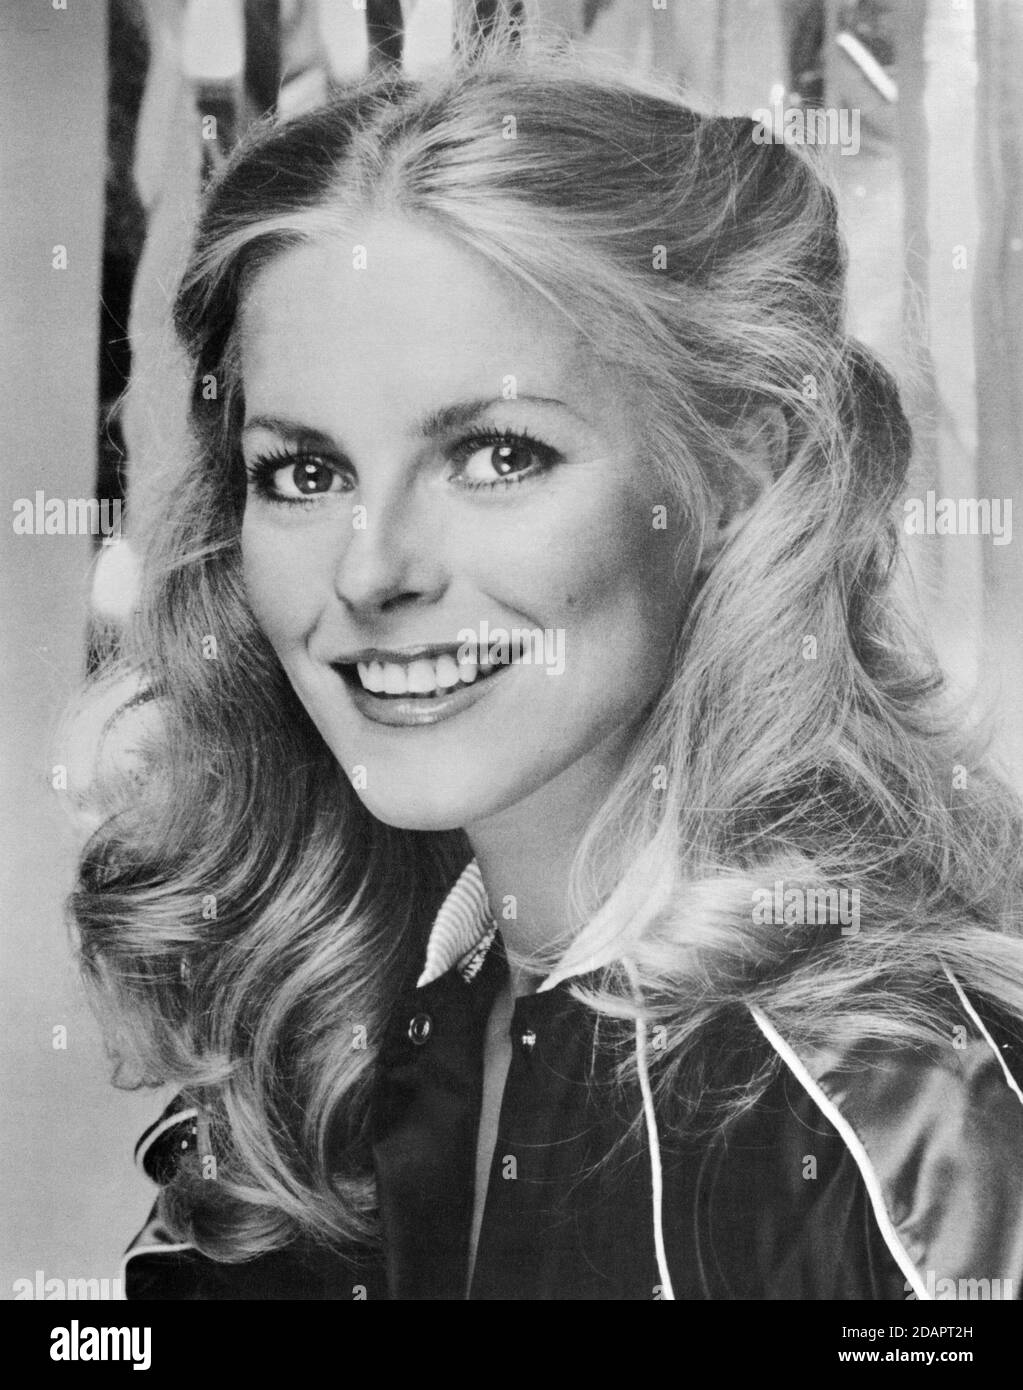 Cheryl Ladd, Head and Shoulders Publicity Portrait for the action-Drama TV Series, « Charlie's Angels », Sony Pictures Television, 1979 Banque D'Images